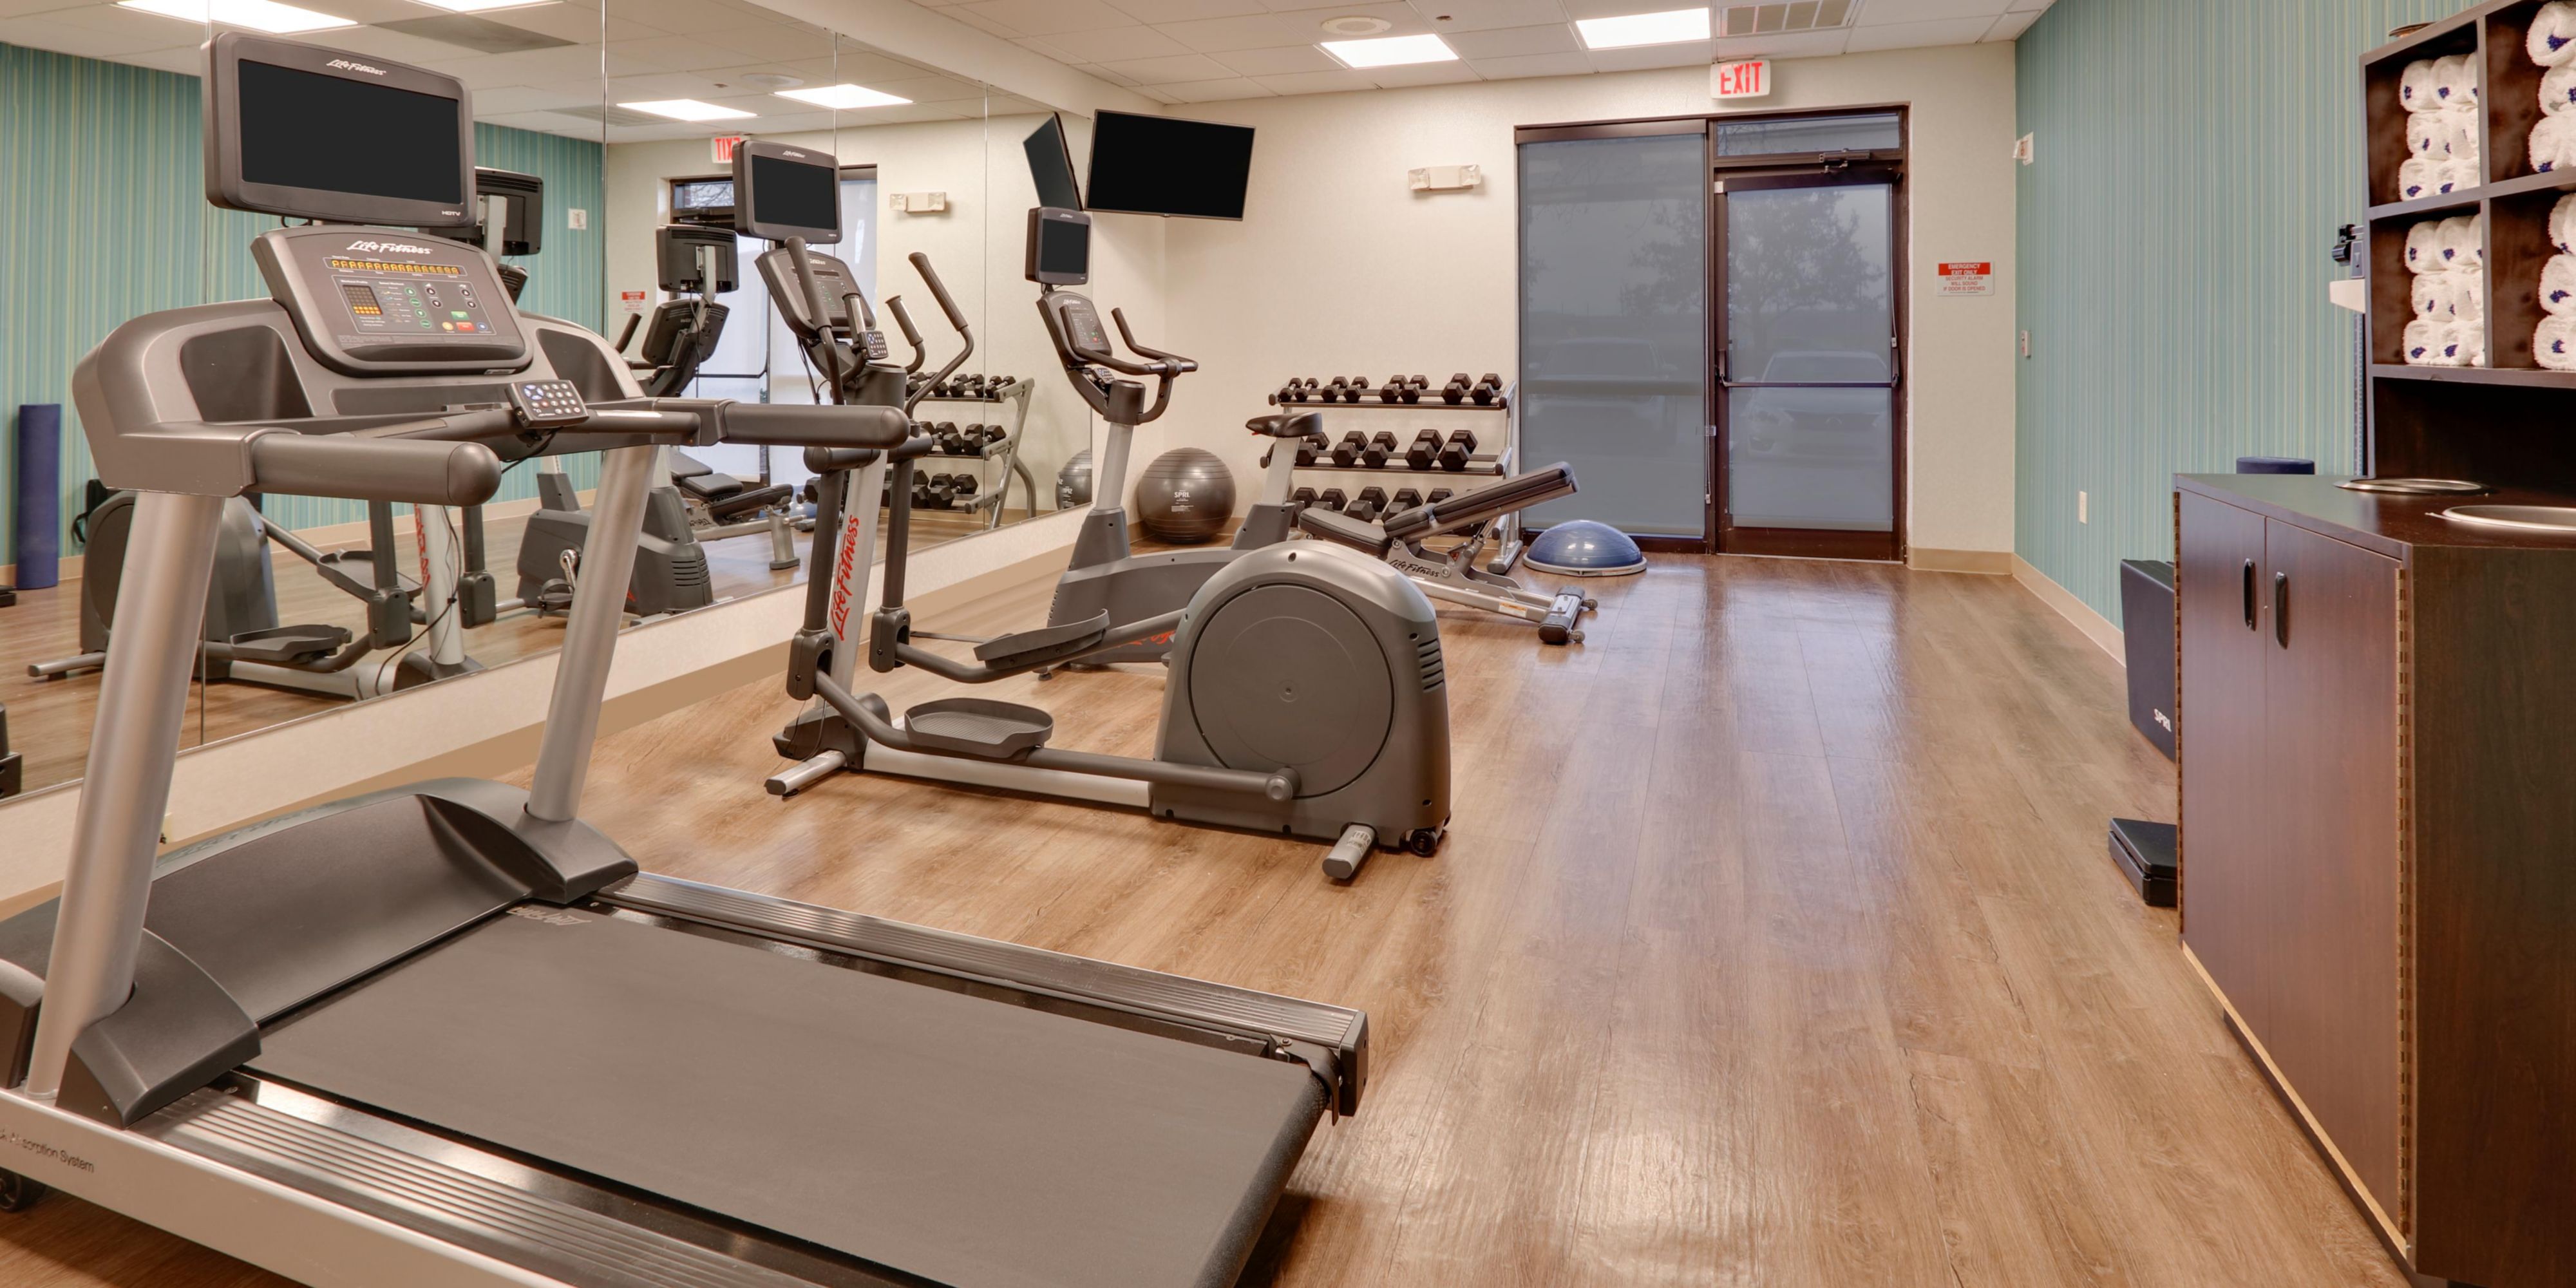 Our Fitness Center is available 7 days a week to help our guests maintain their healthy lifestyle while away from home.  We have treadmills, elliptical machines, a stationary bike and free weights.